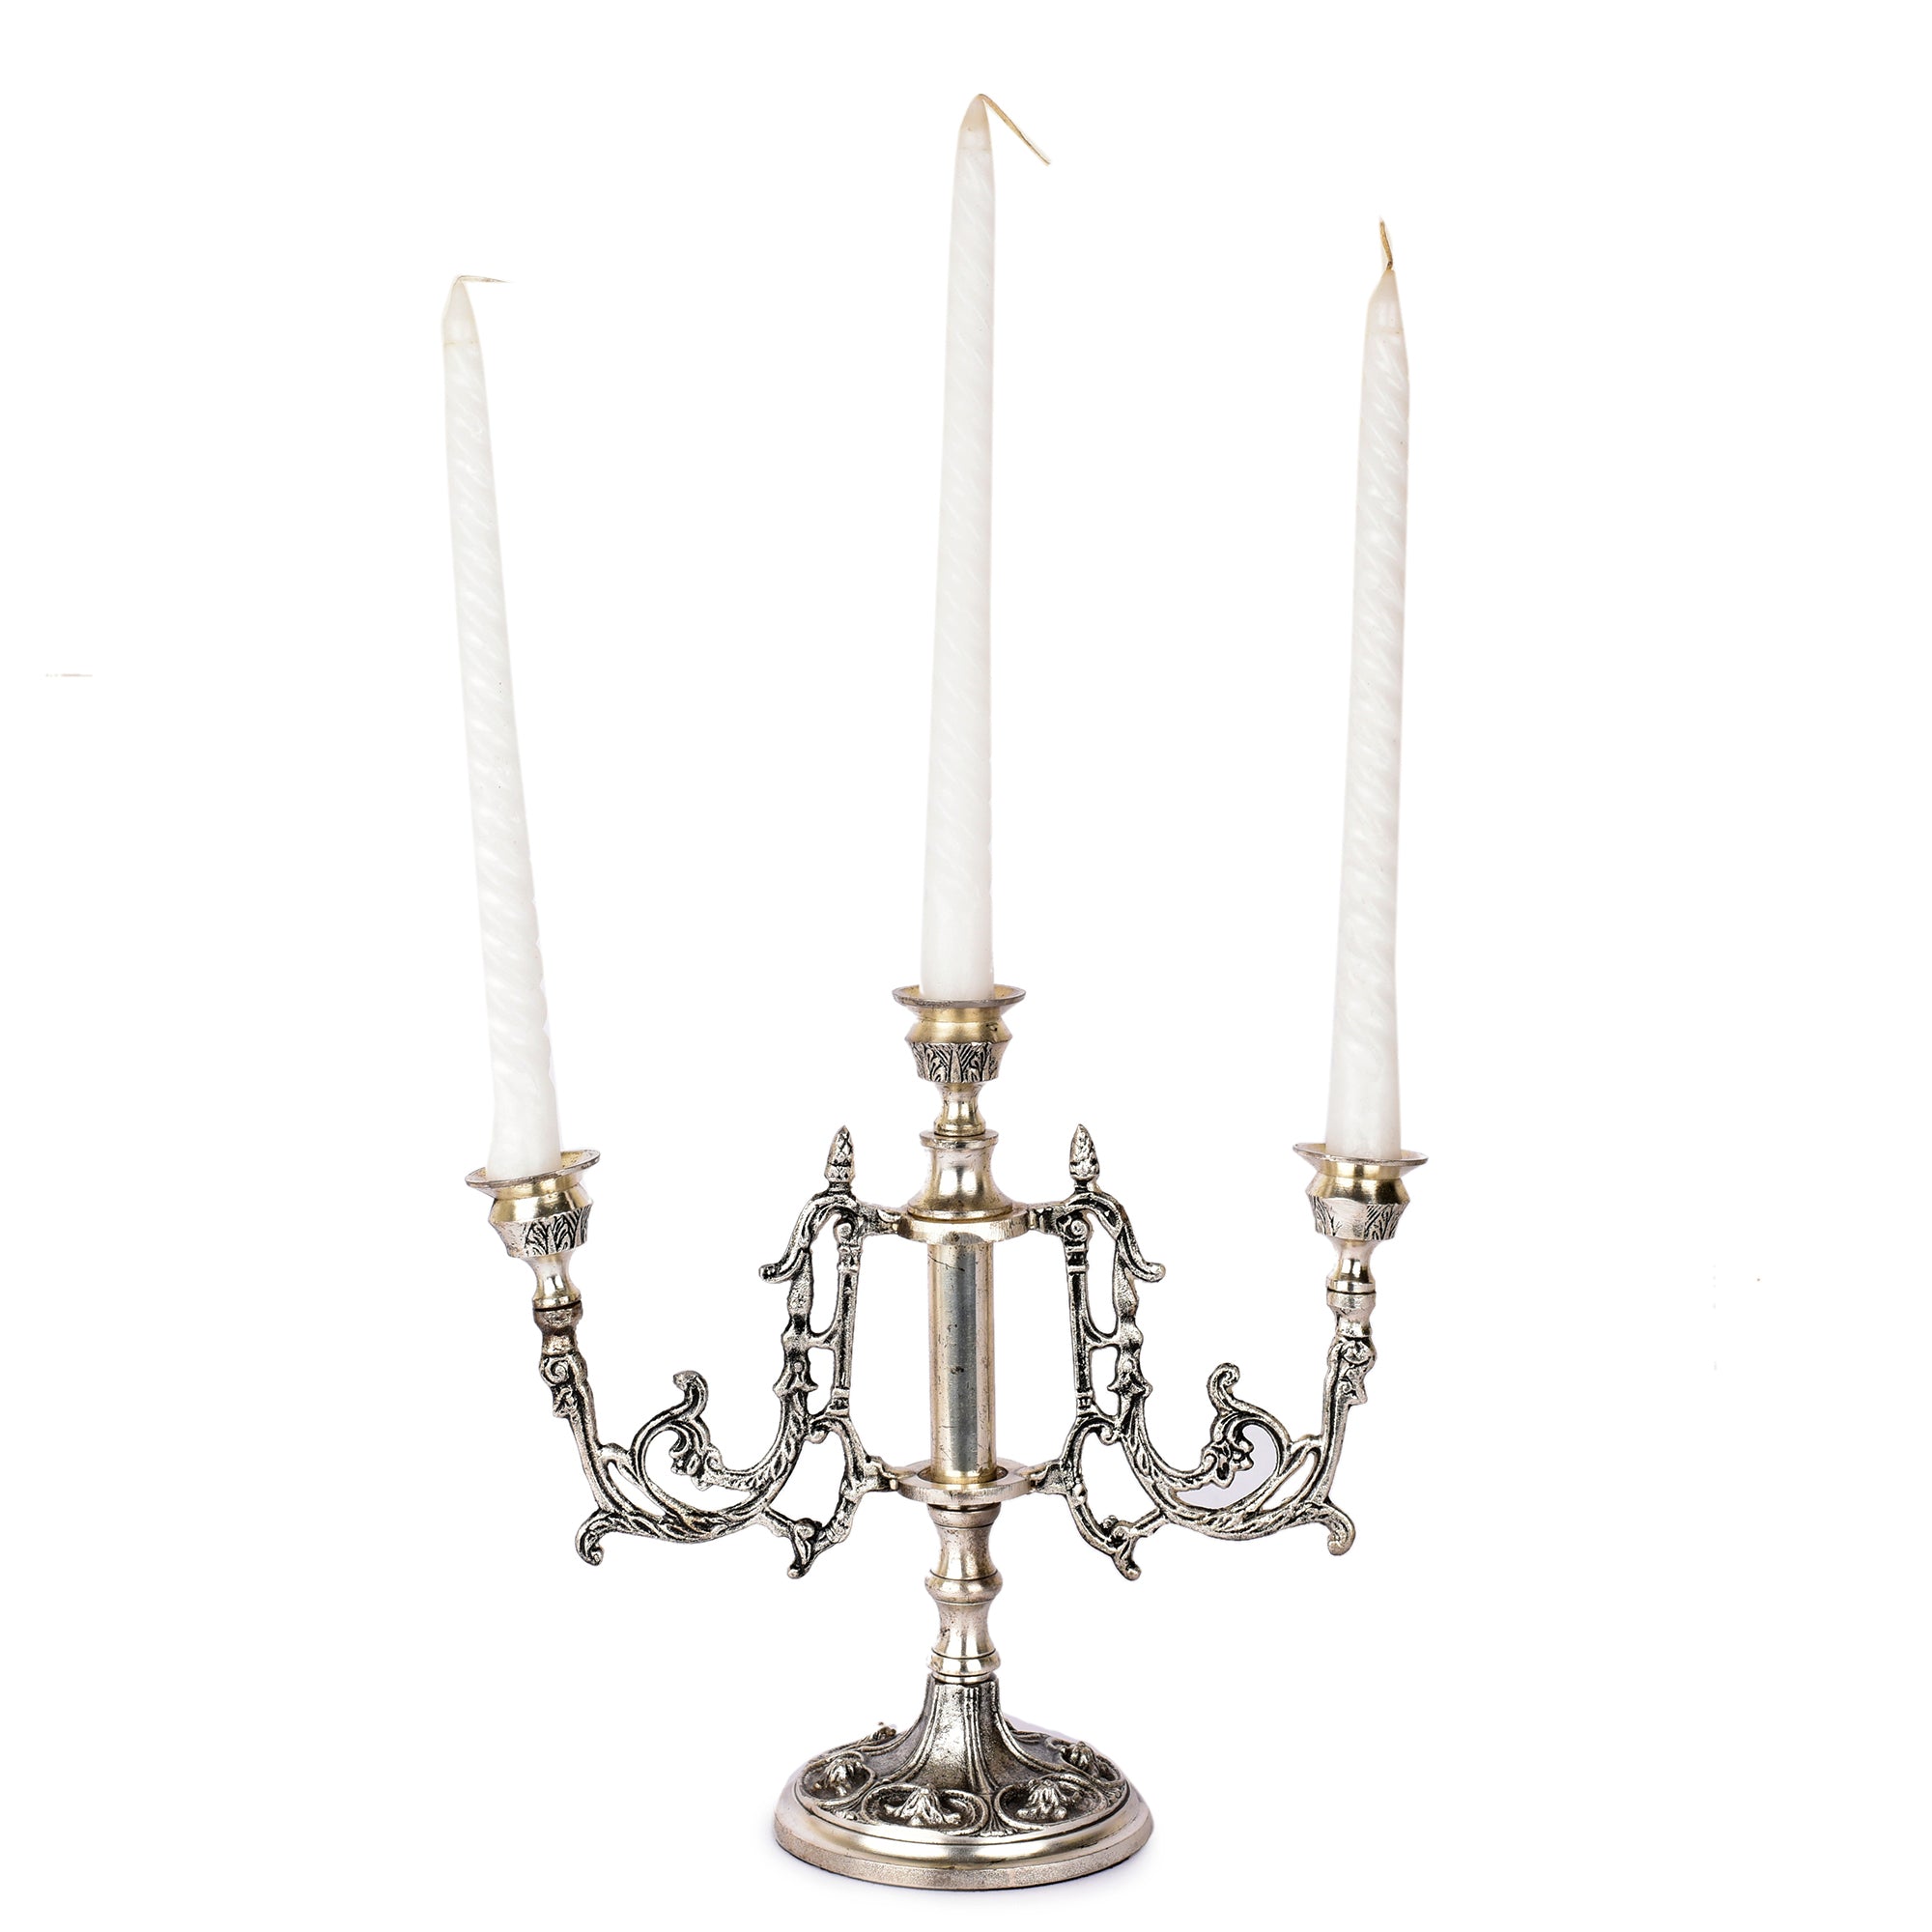 Victorian 3 Pillar Candle Stand Silver Finish